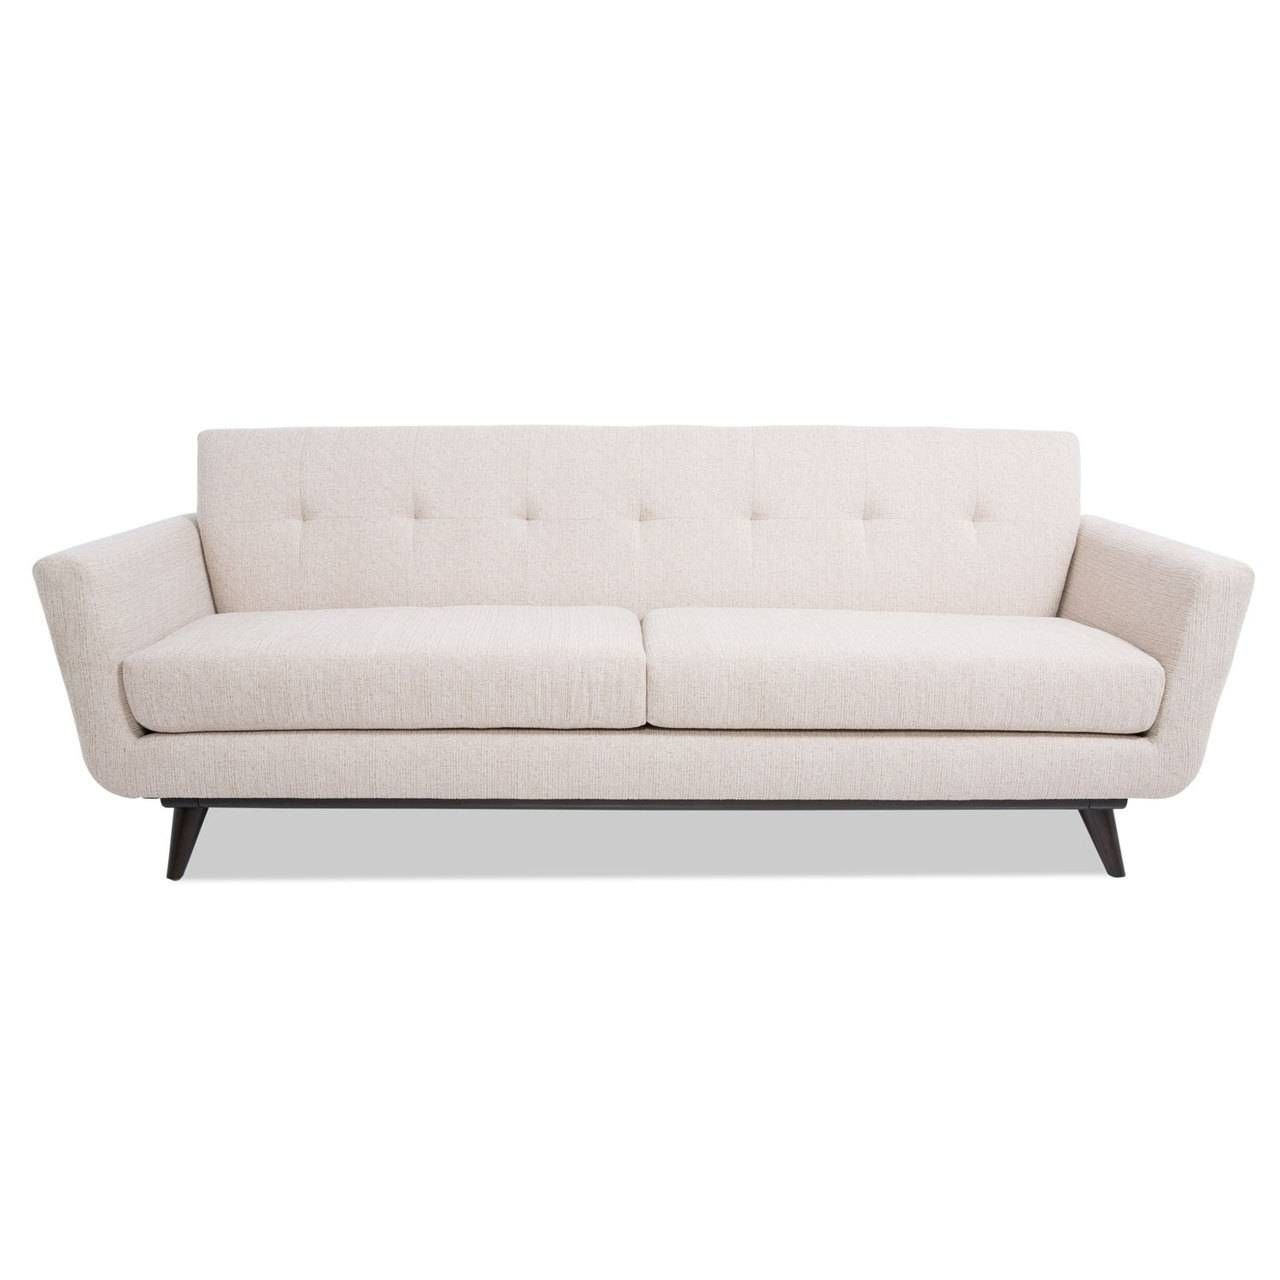 ▻ Sofa : 7 Fancy Nixon Sofa Bed 47 For Manstad Sectional Sofa Bed Throughout Fancy Sofas (View 16 of 30)